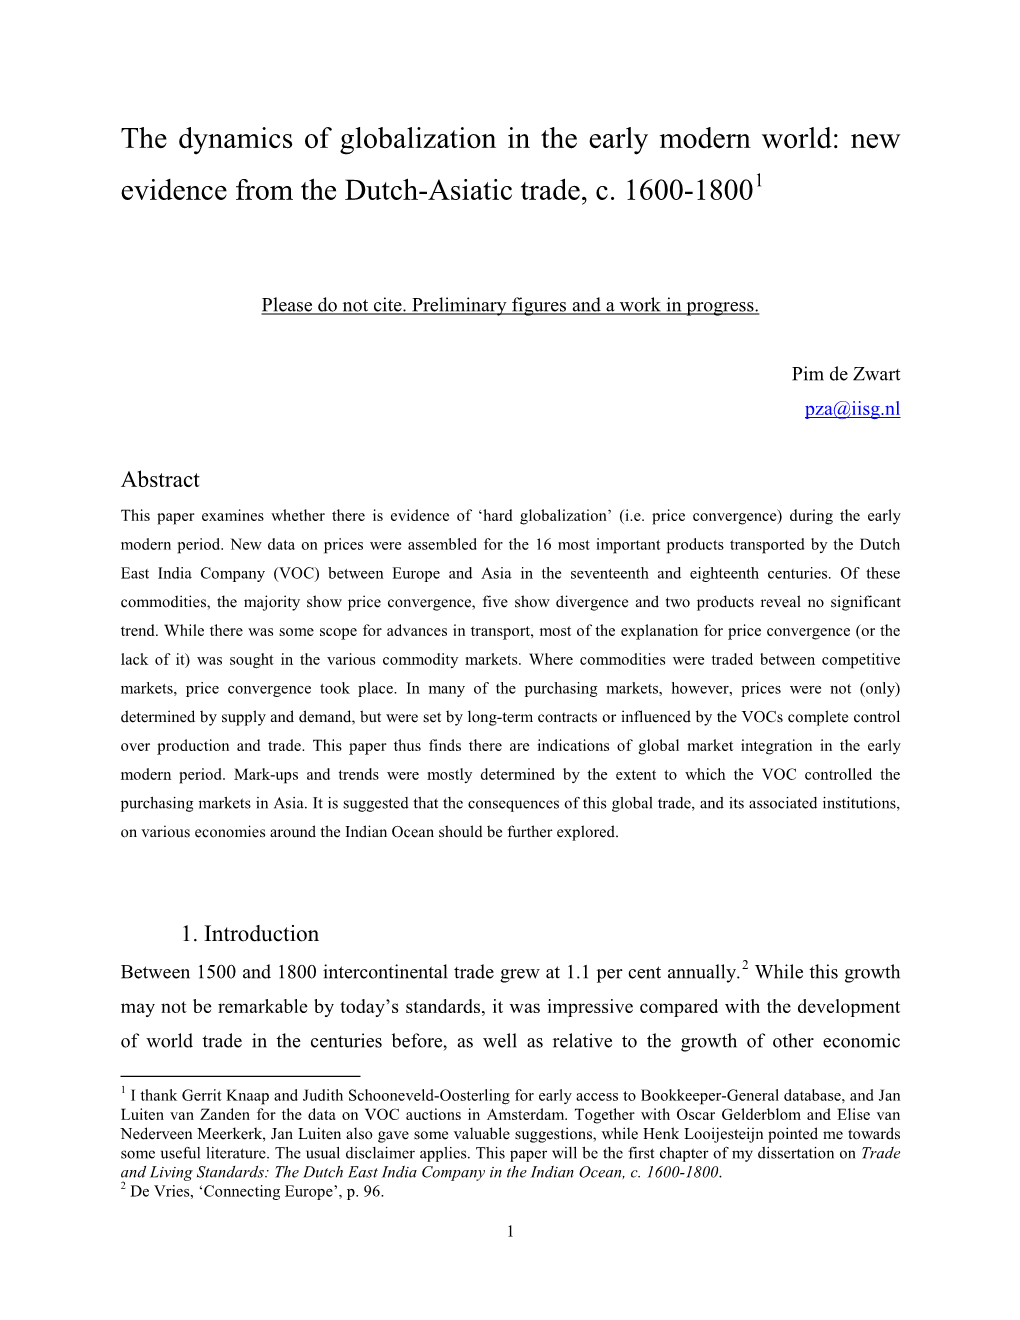 The Dynamics of Globalization in the Early Modern World: New Evidence from the Dutch-Asiatic Trade, C